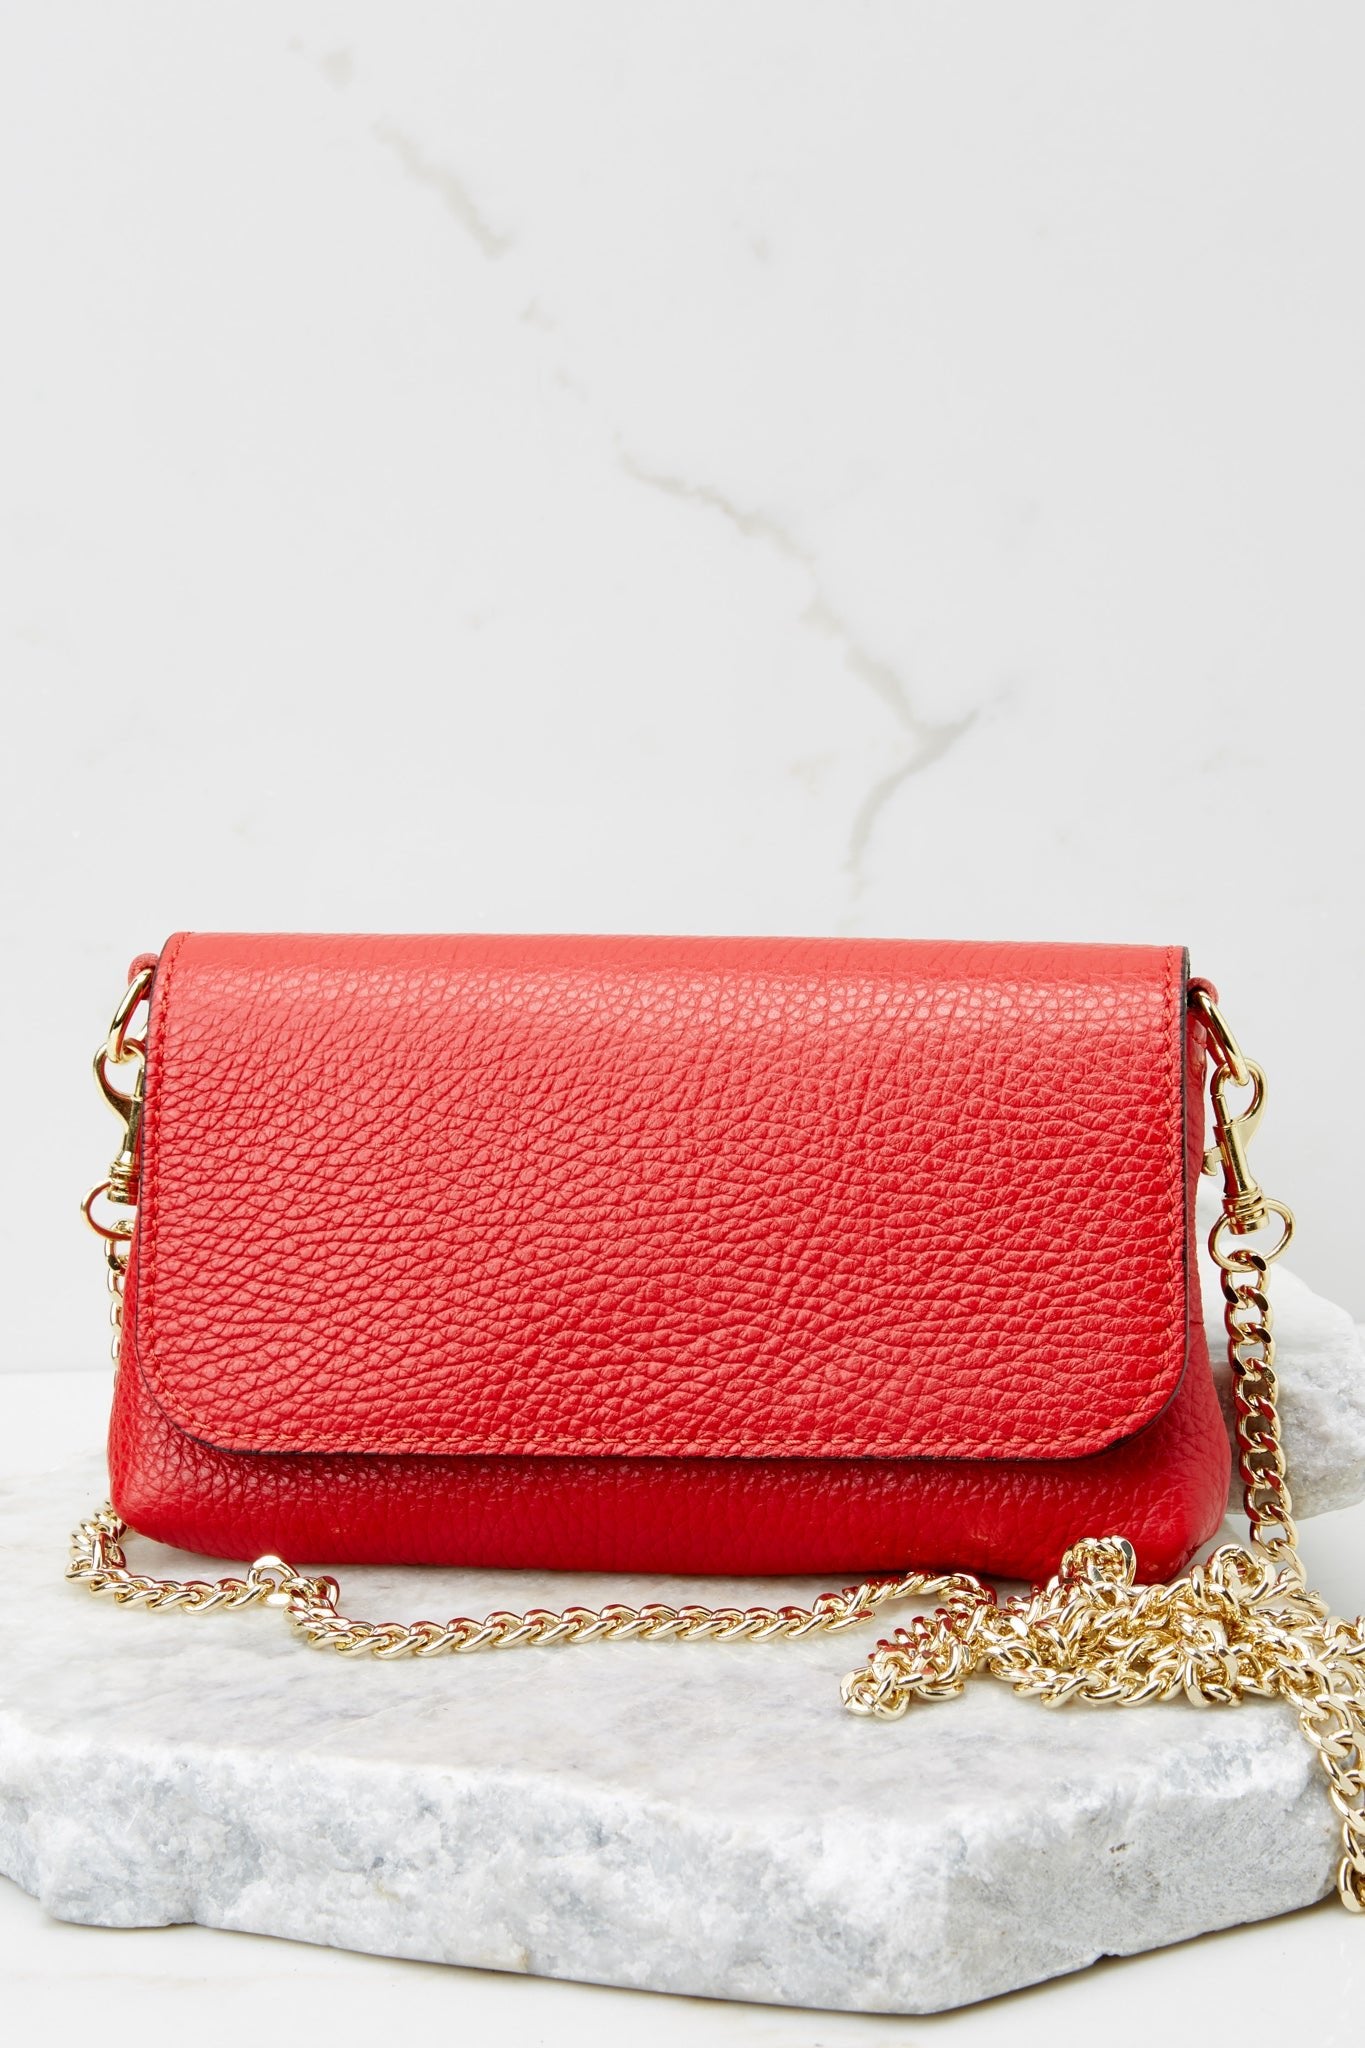 Red (V) leather pouch